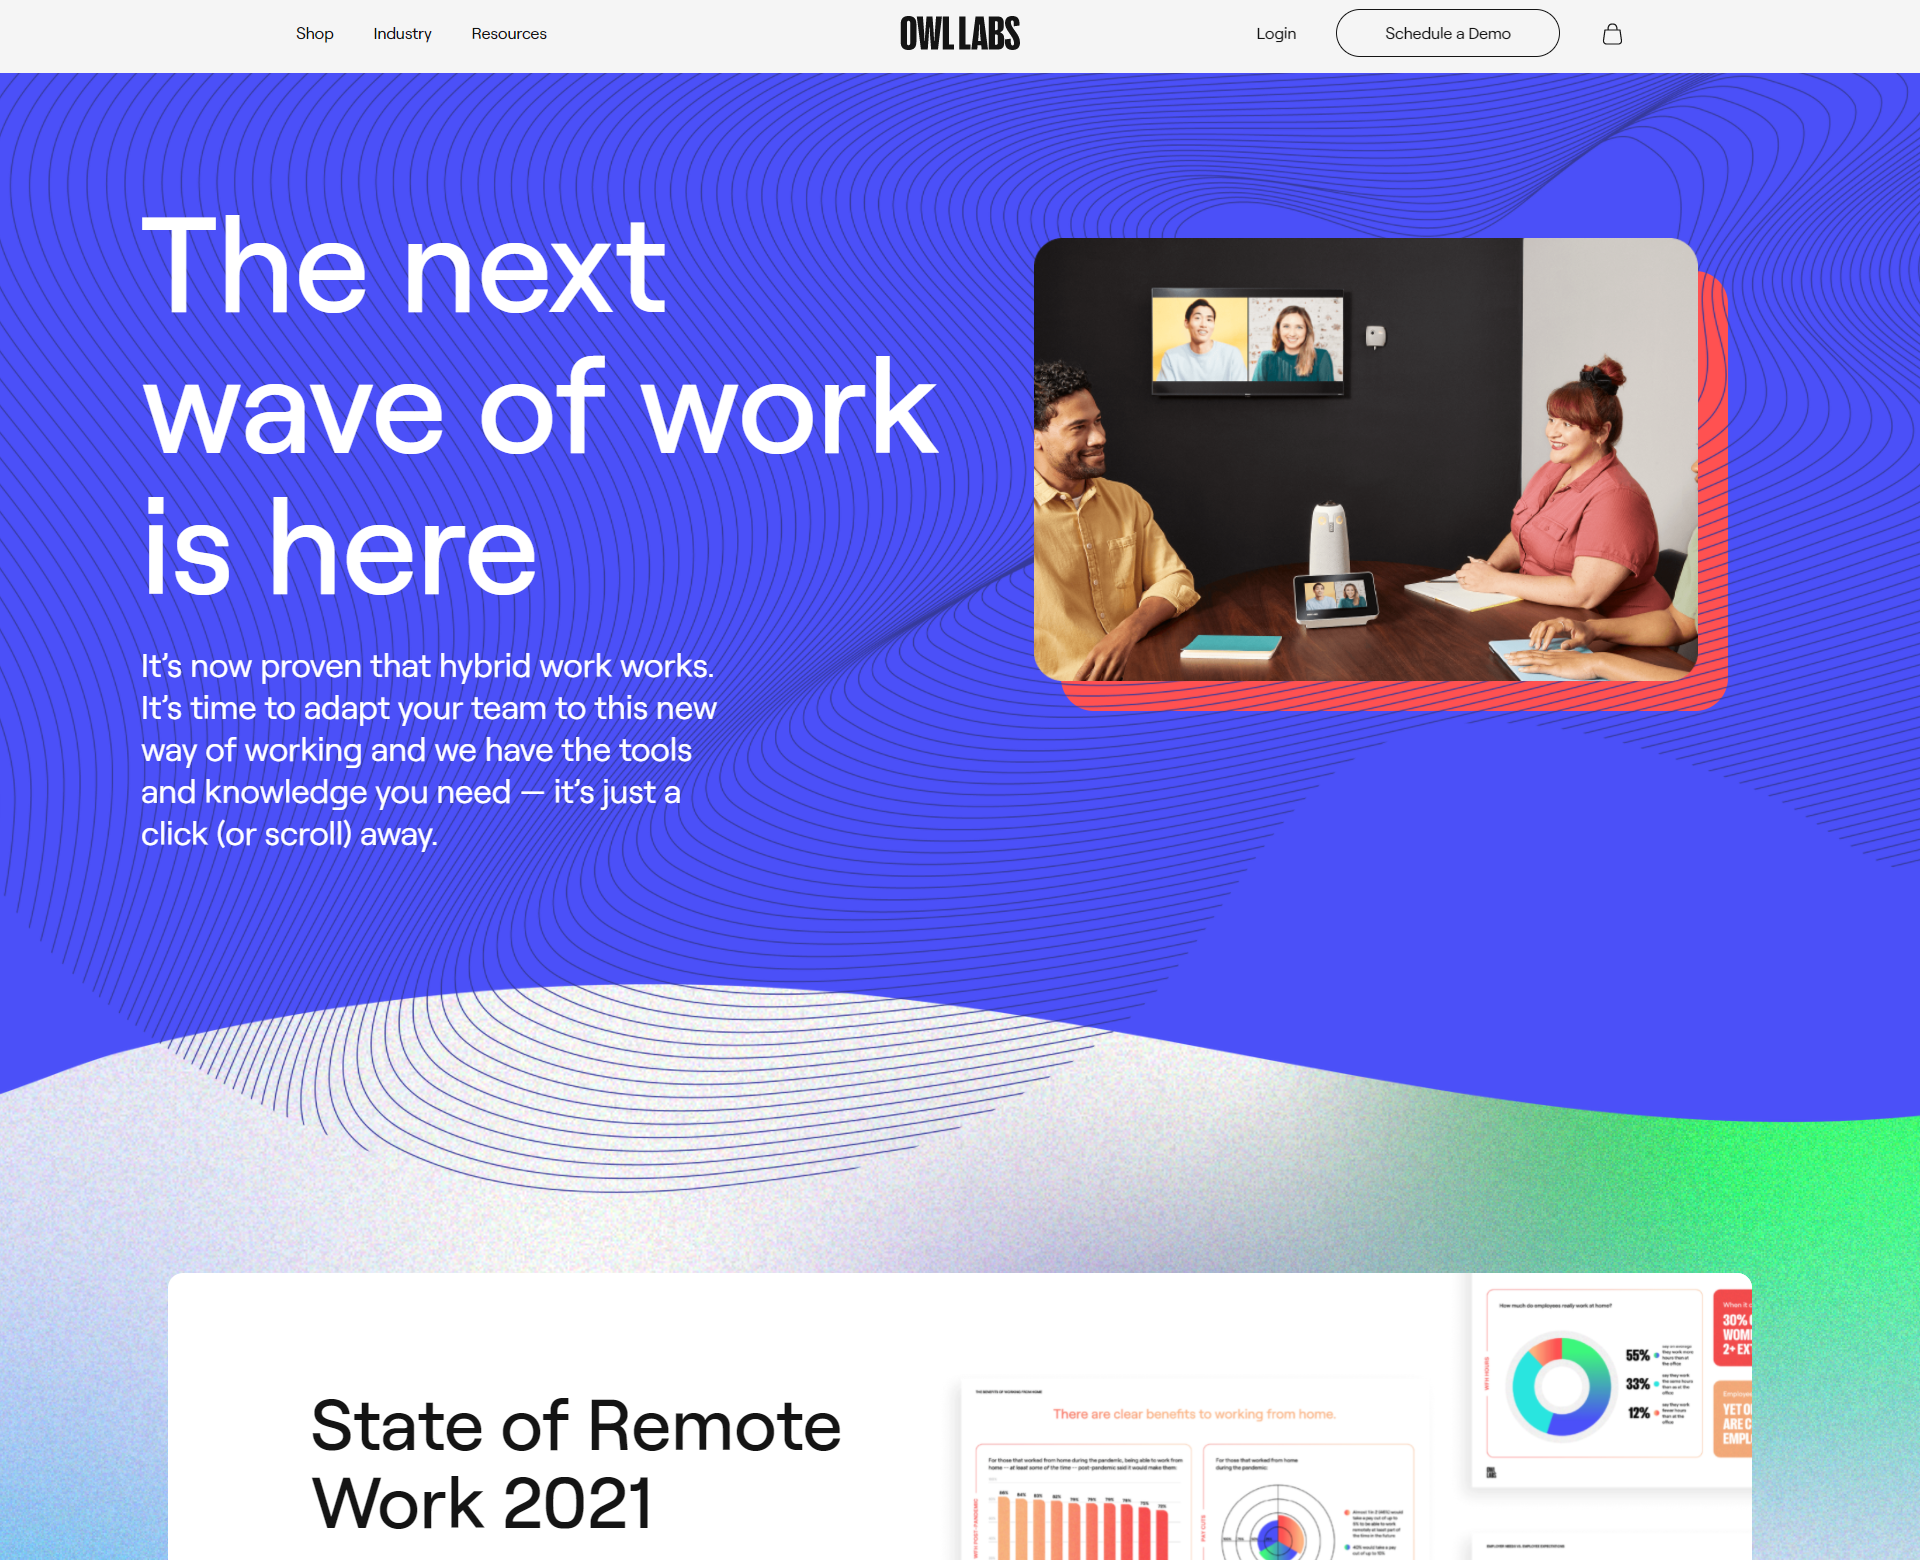 "The next wave of work is here" with a team collaborating in a hybrid meeting and "State of Remote Work 2021" with graphs